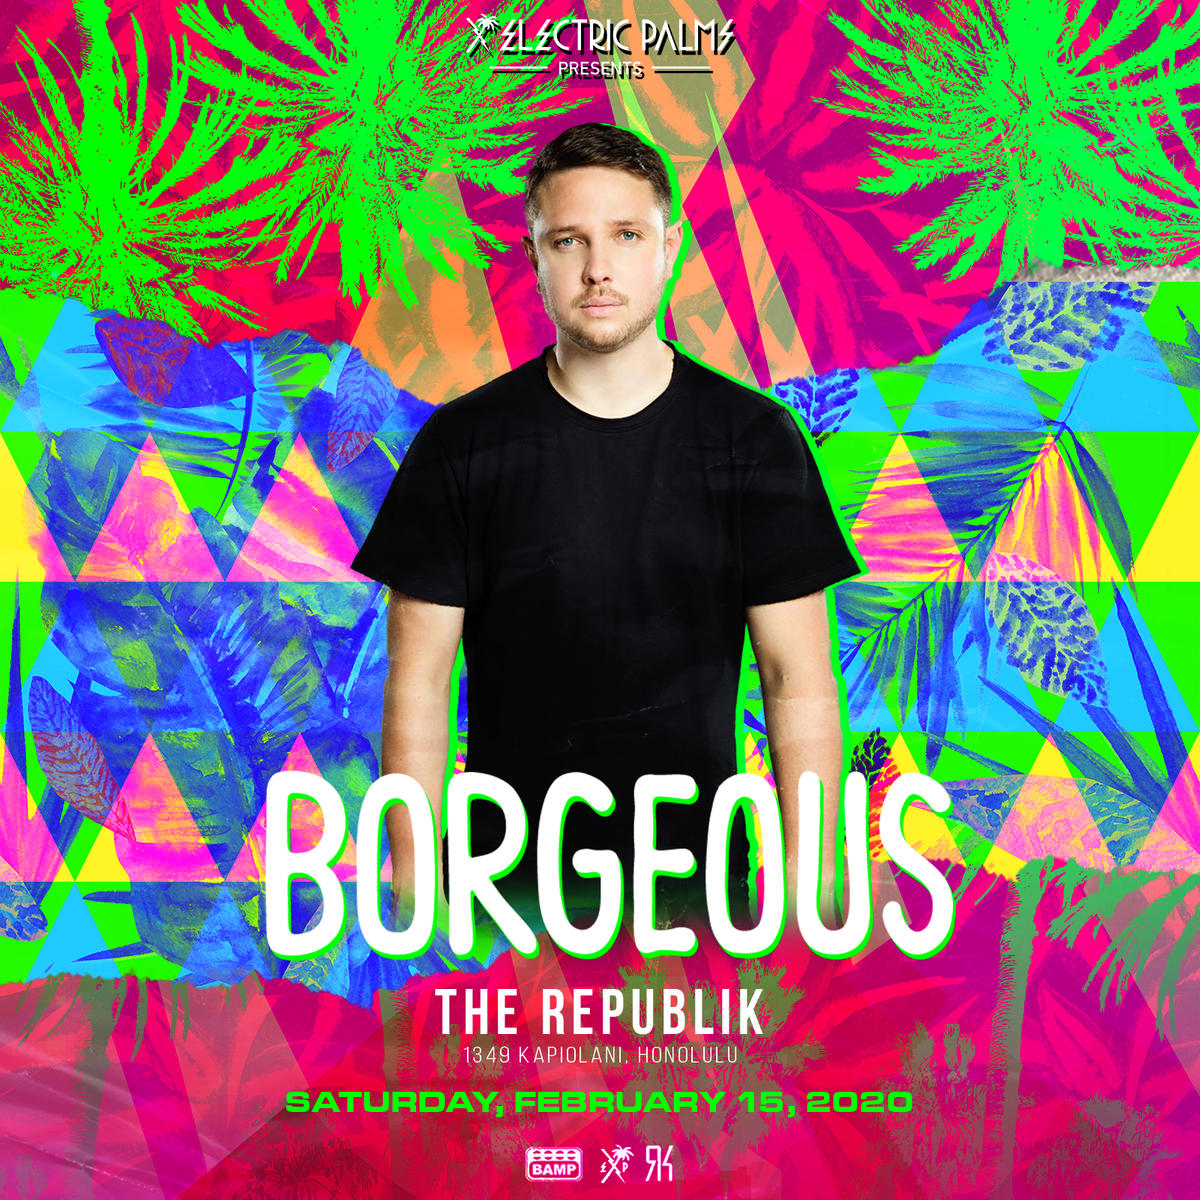 ep_borgeous-1600-1600.png